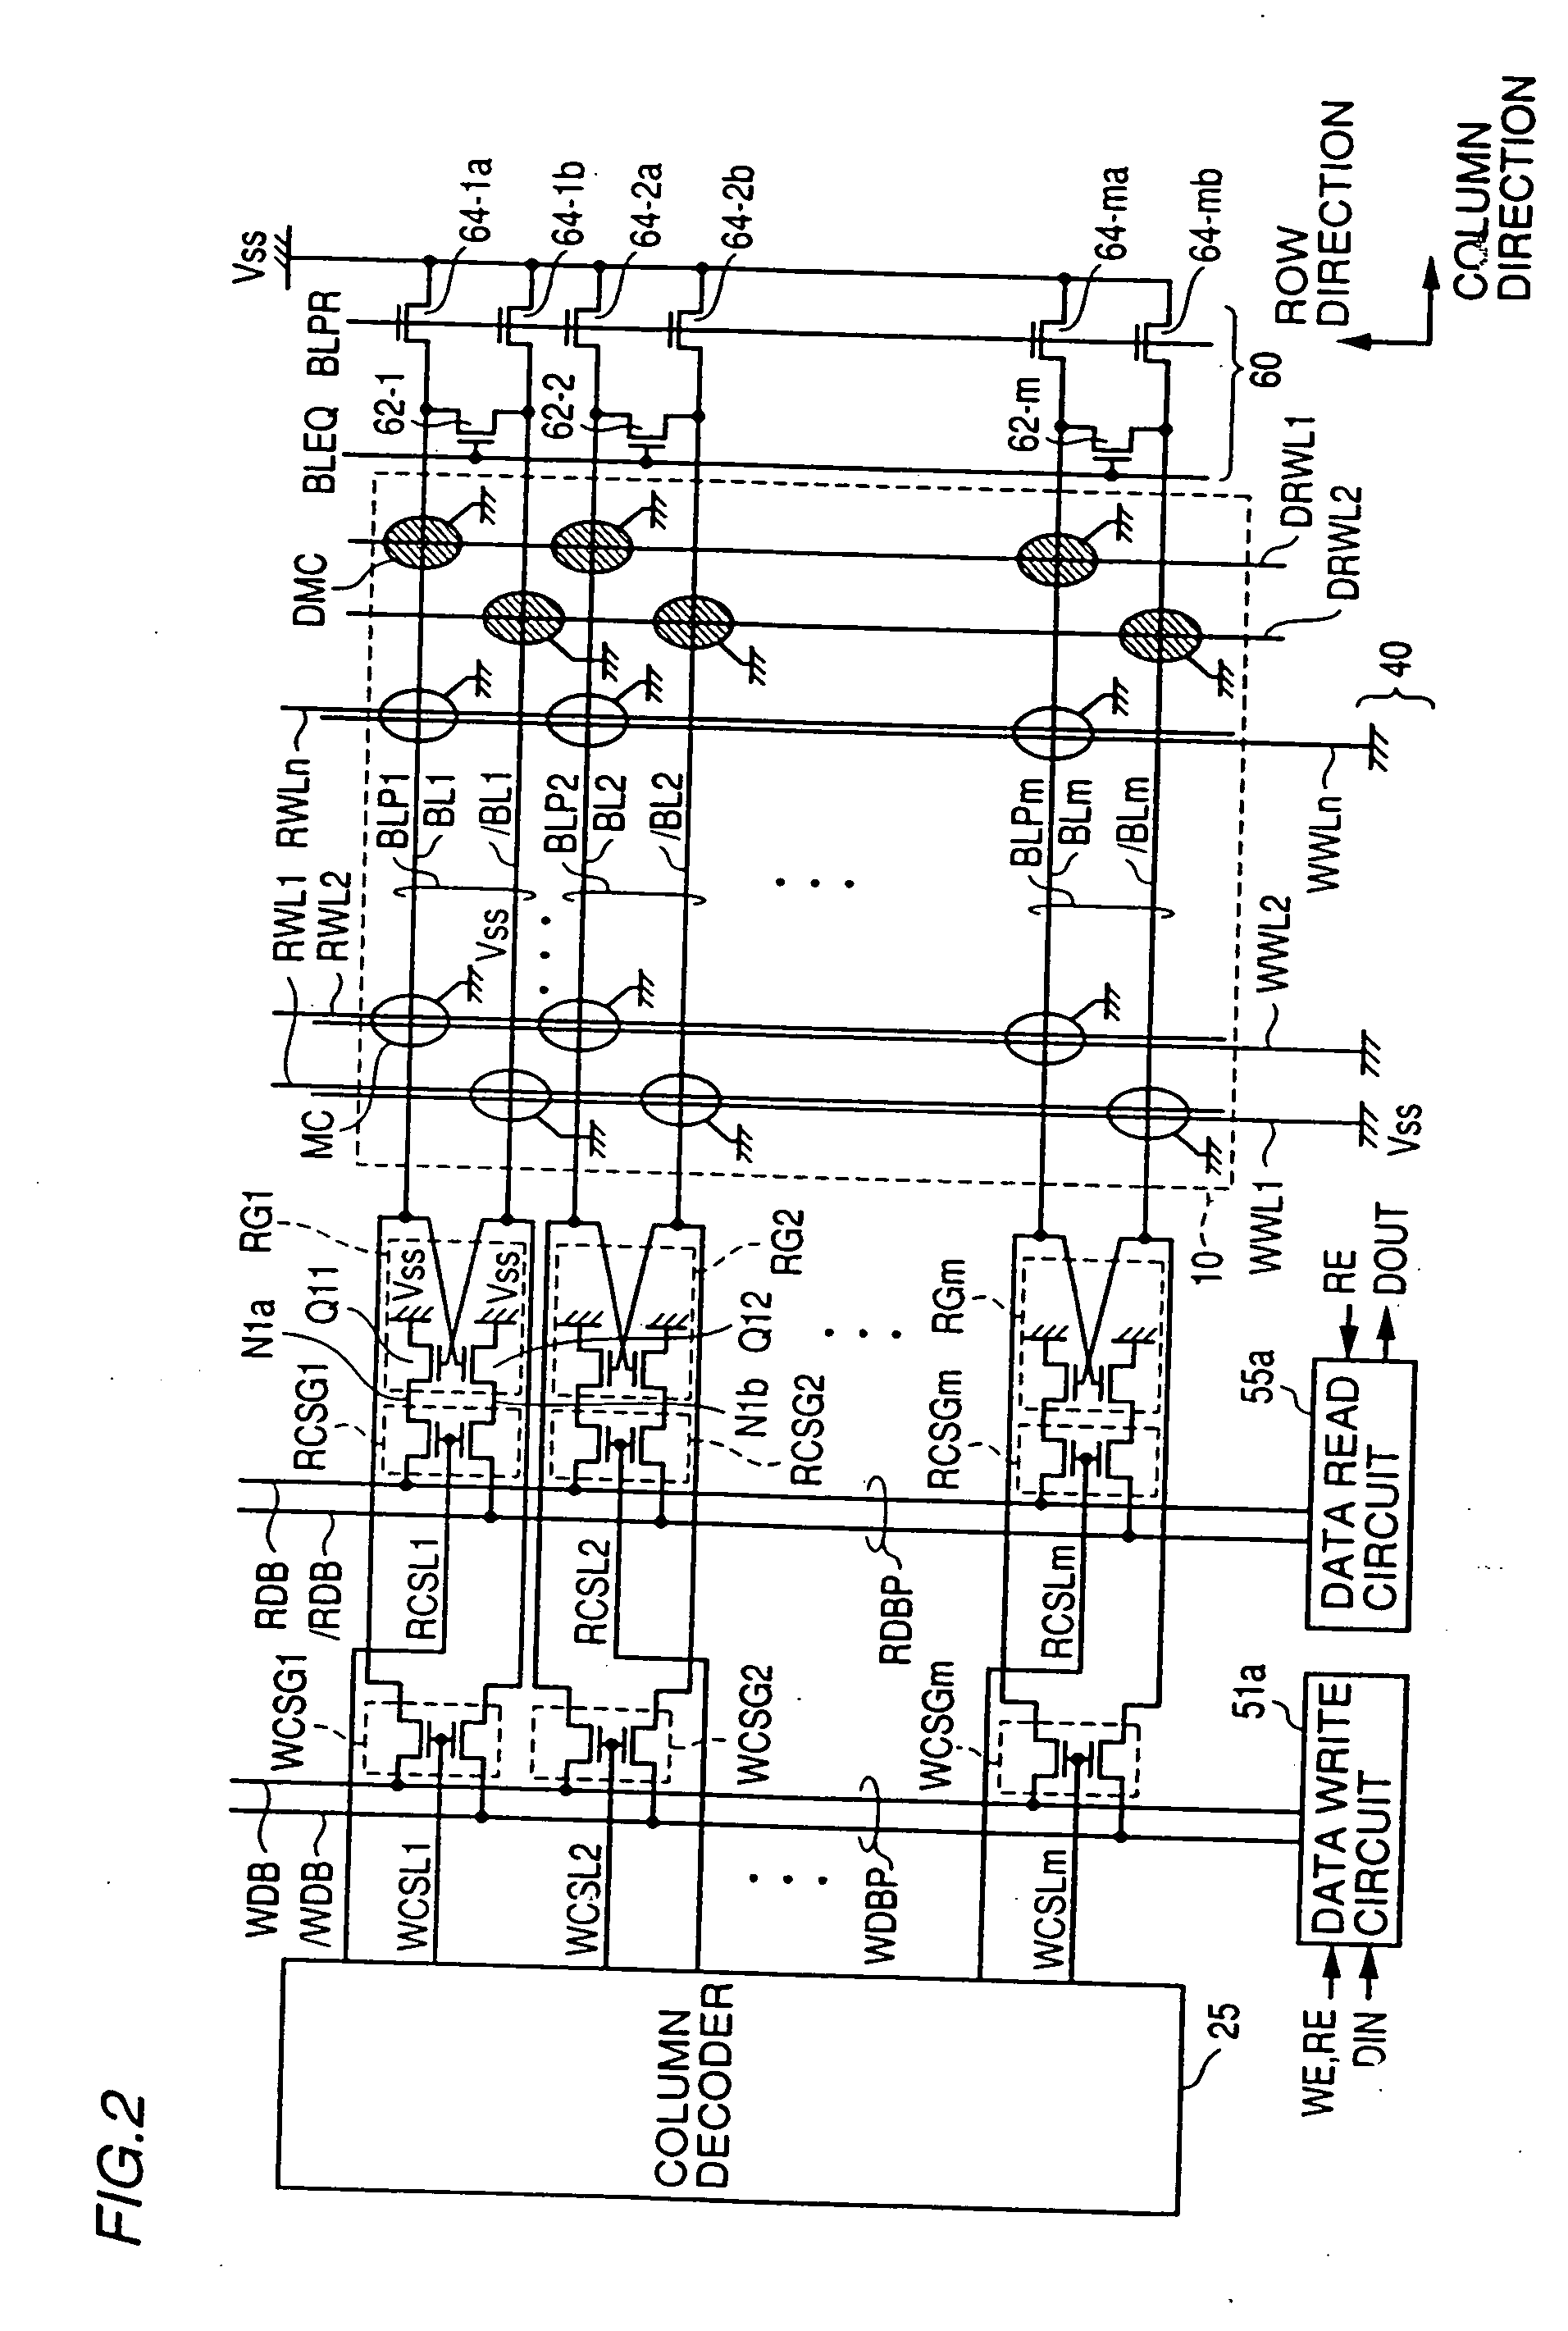 Thin film magnetic memory device including memory cells having a magnetic tunnel junction